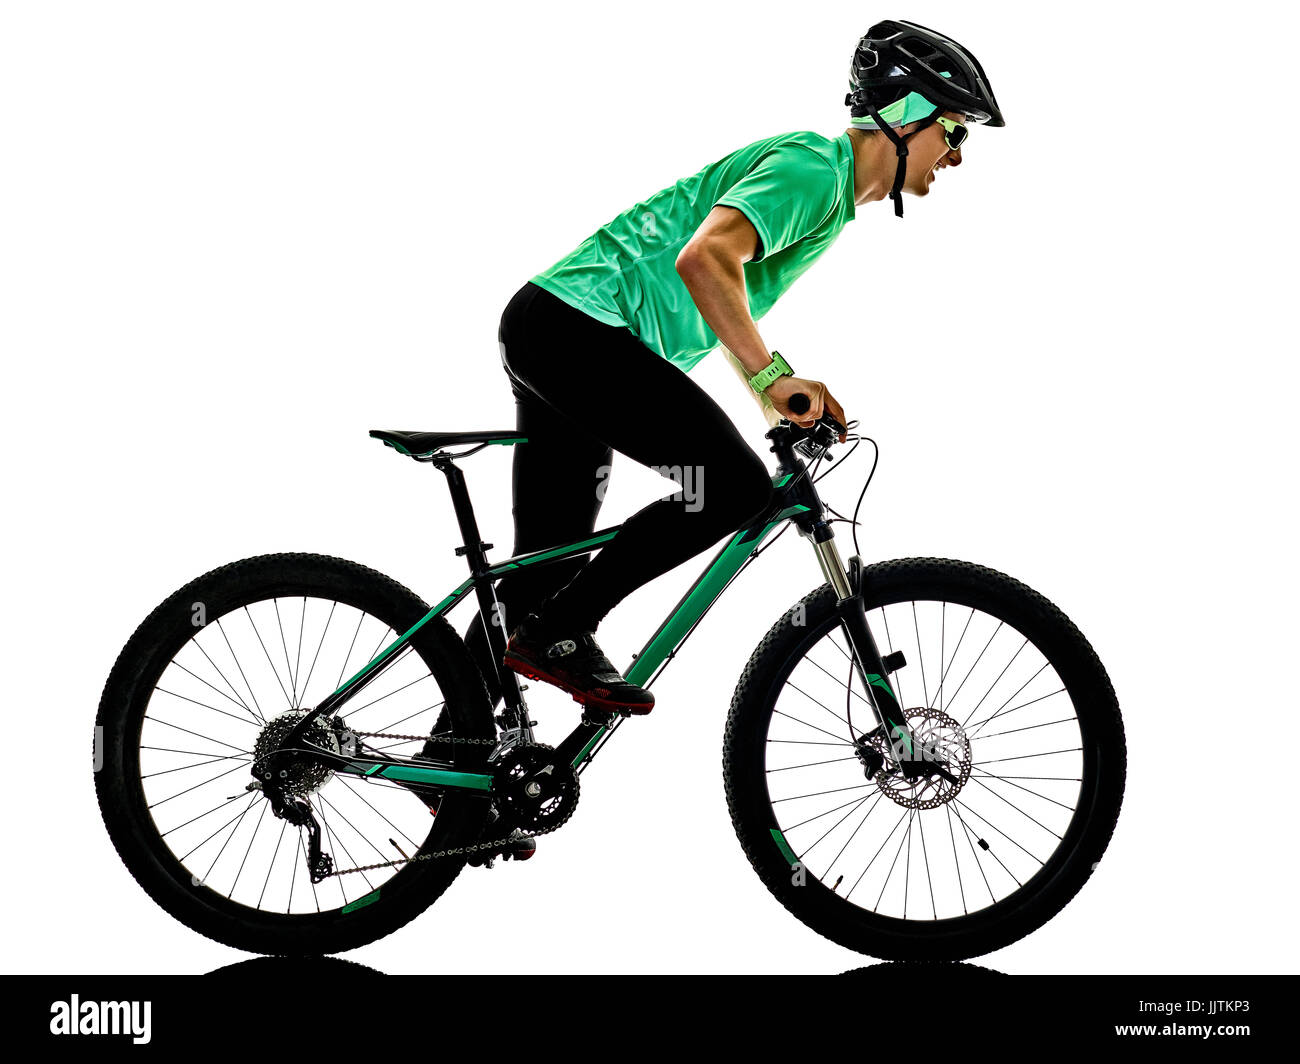 one caucasian man practicing man mountain bike bking isolated on white background with shadows Stock Photo